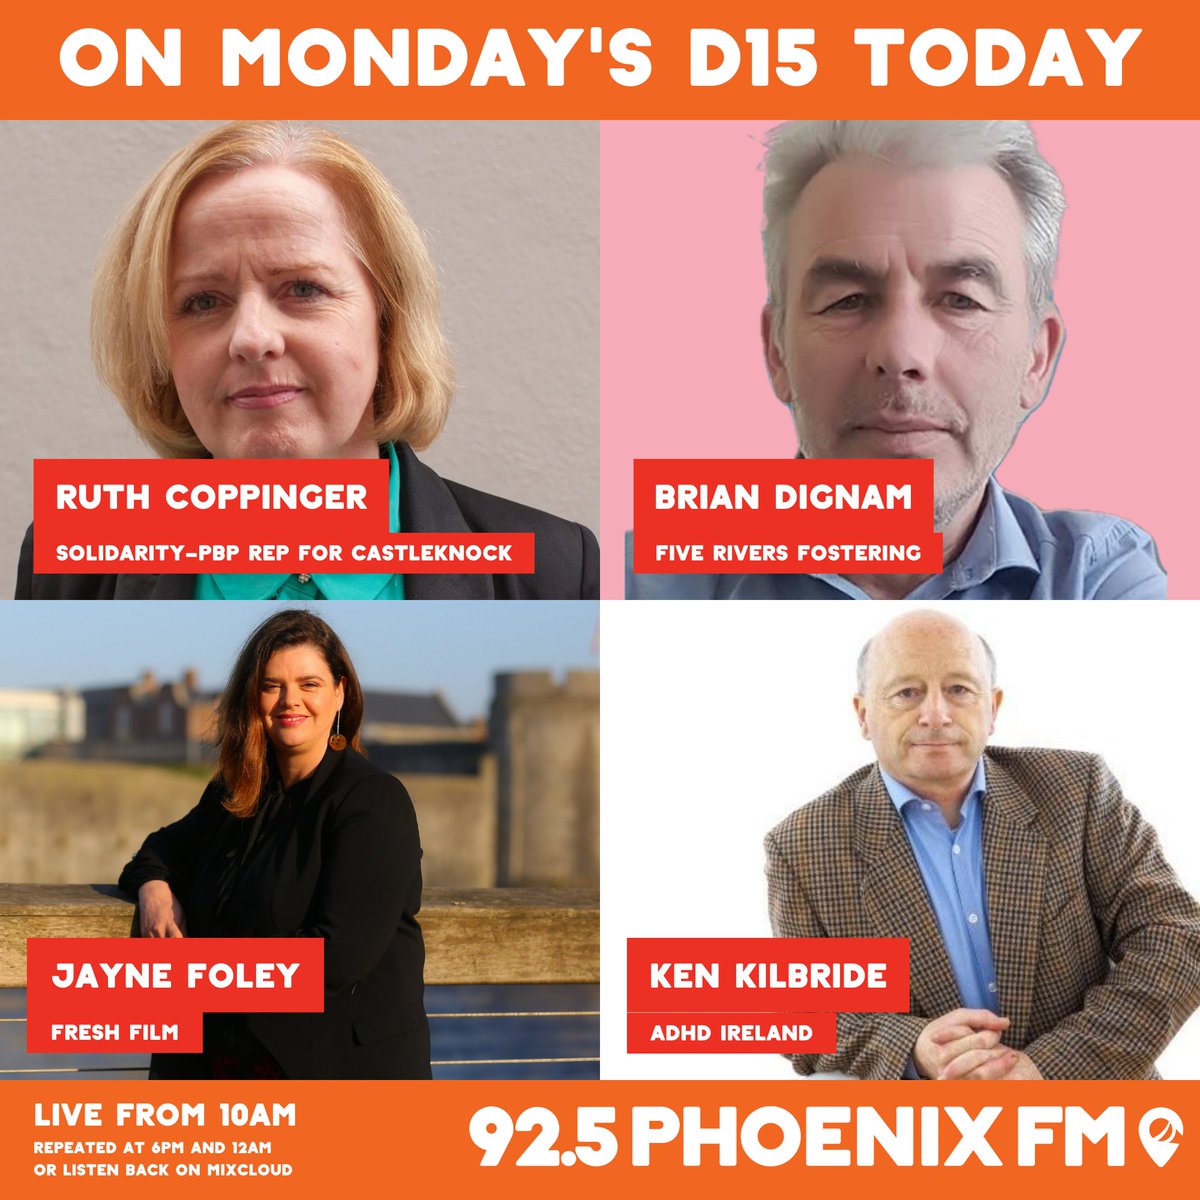 On Monday's D15 Today: - @RuthCoppingerSP - @five_rivers' appeal for foster families - @FreshIreland's Young Filmmaker of the Year Awards - @adhdireland's online awareness programme Listen live from 10am on 92.5 FM and online at live.phoenixfm.ie!